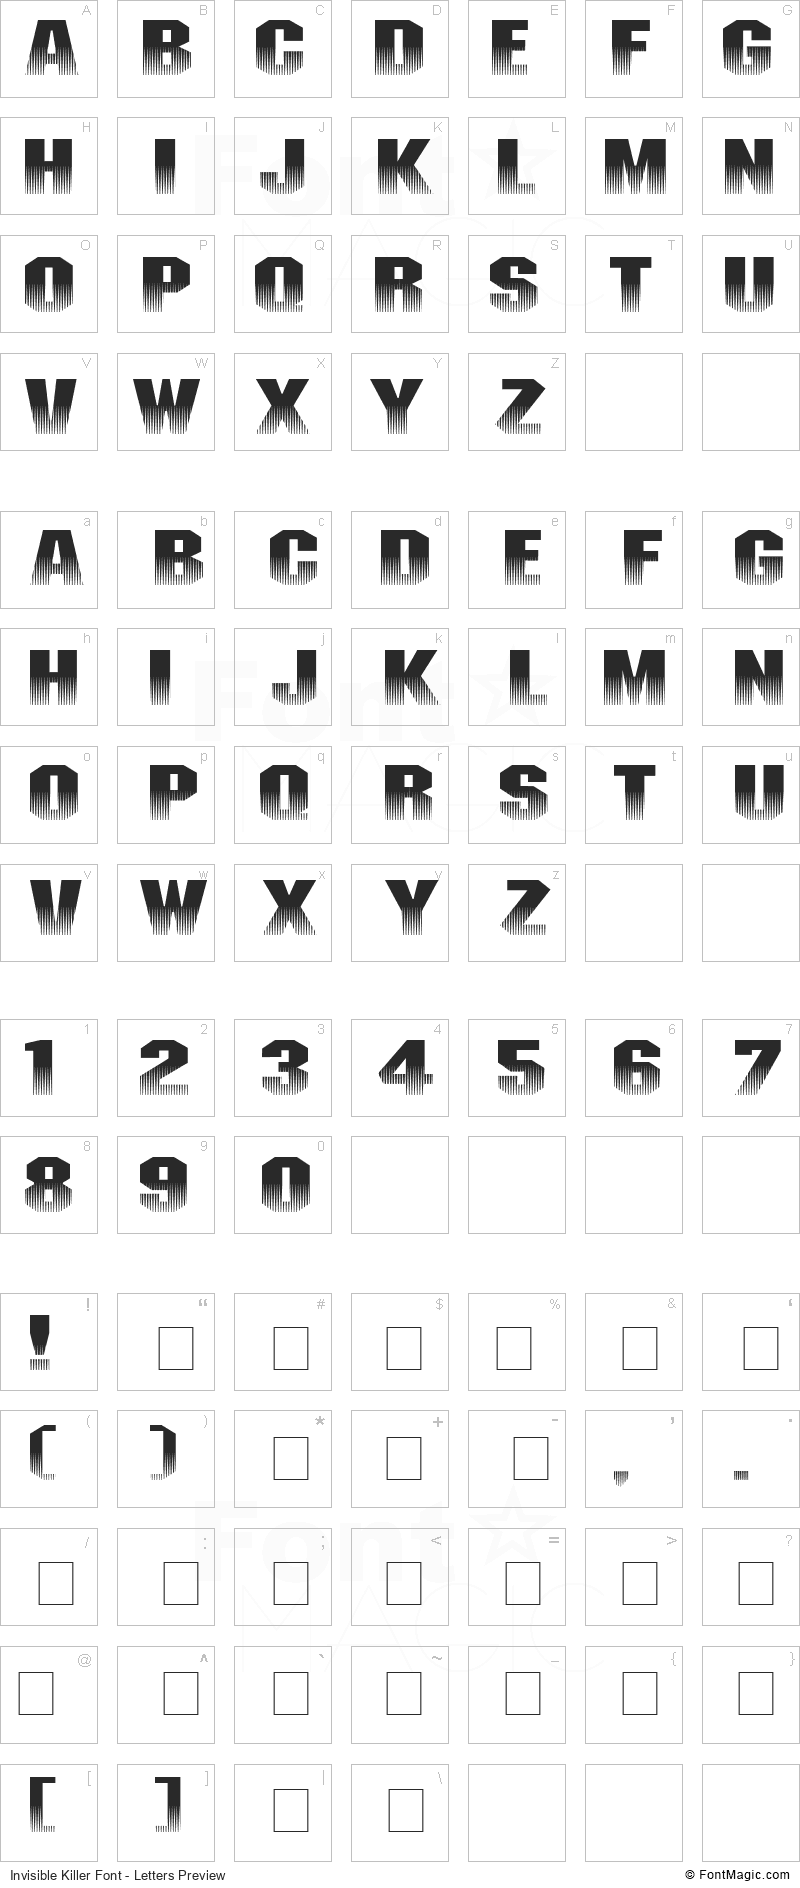 Invisible Killer Font - All Latters Preview Chart